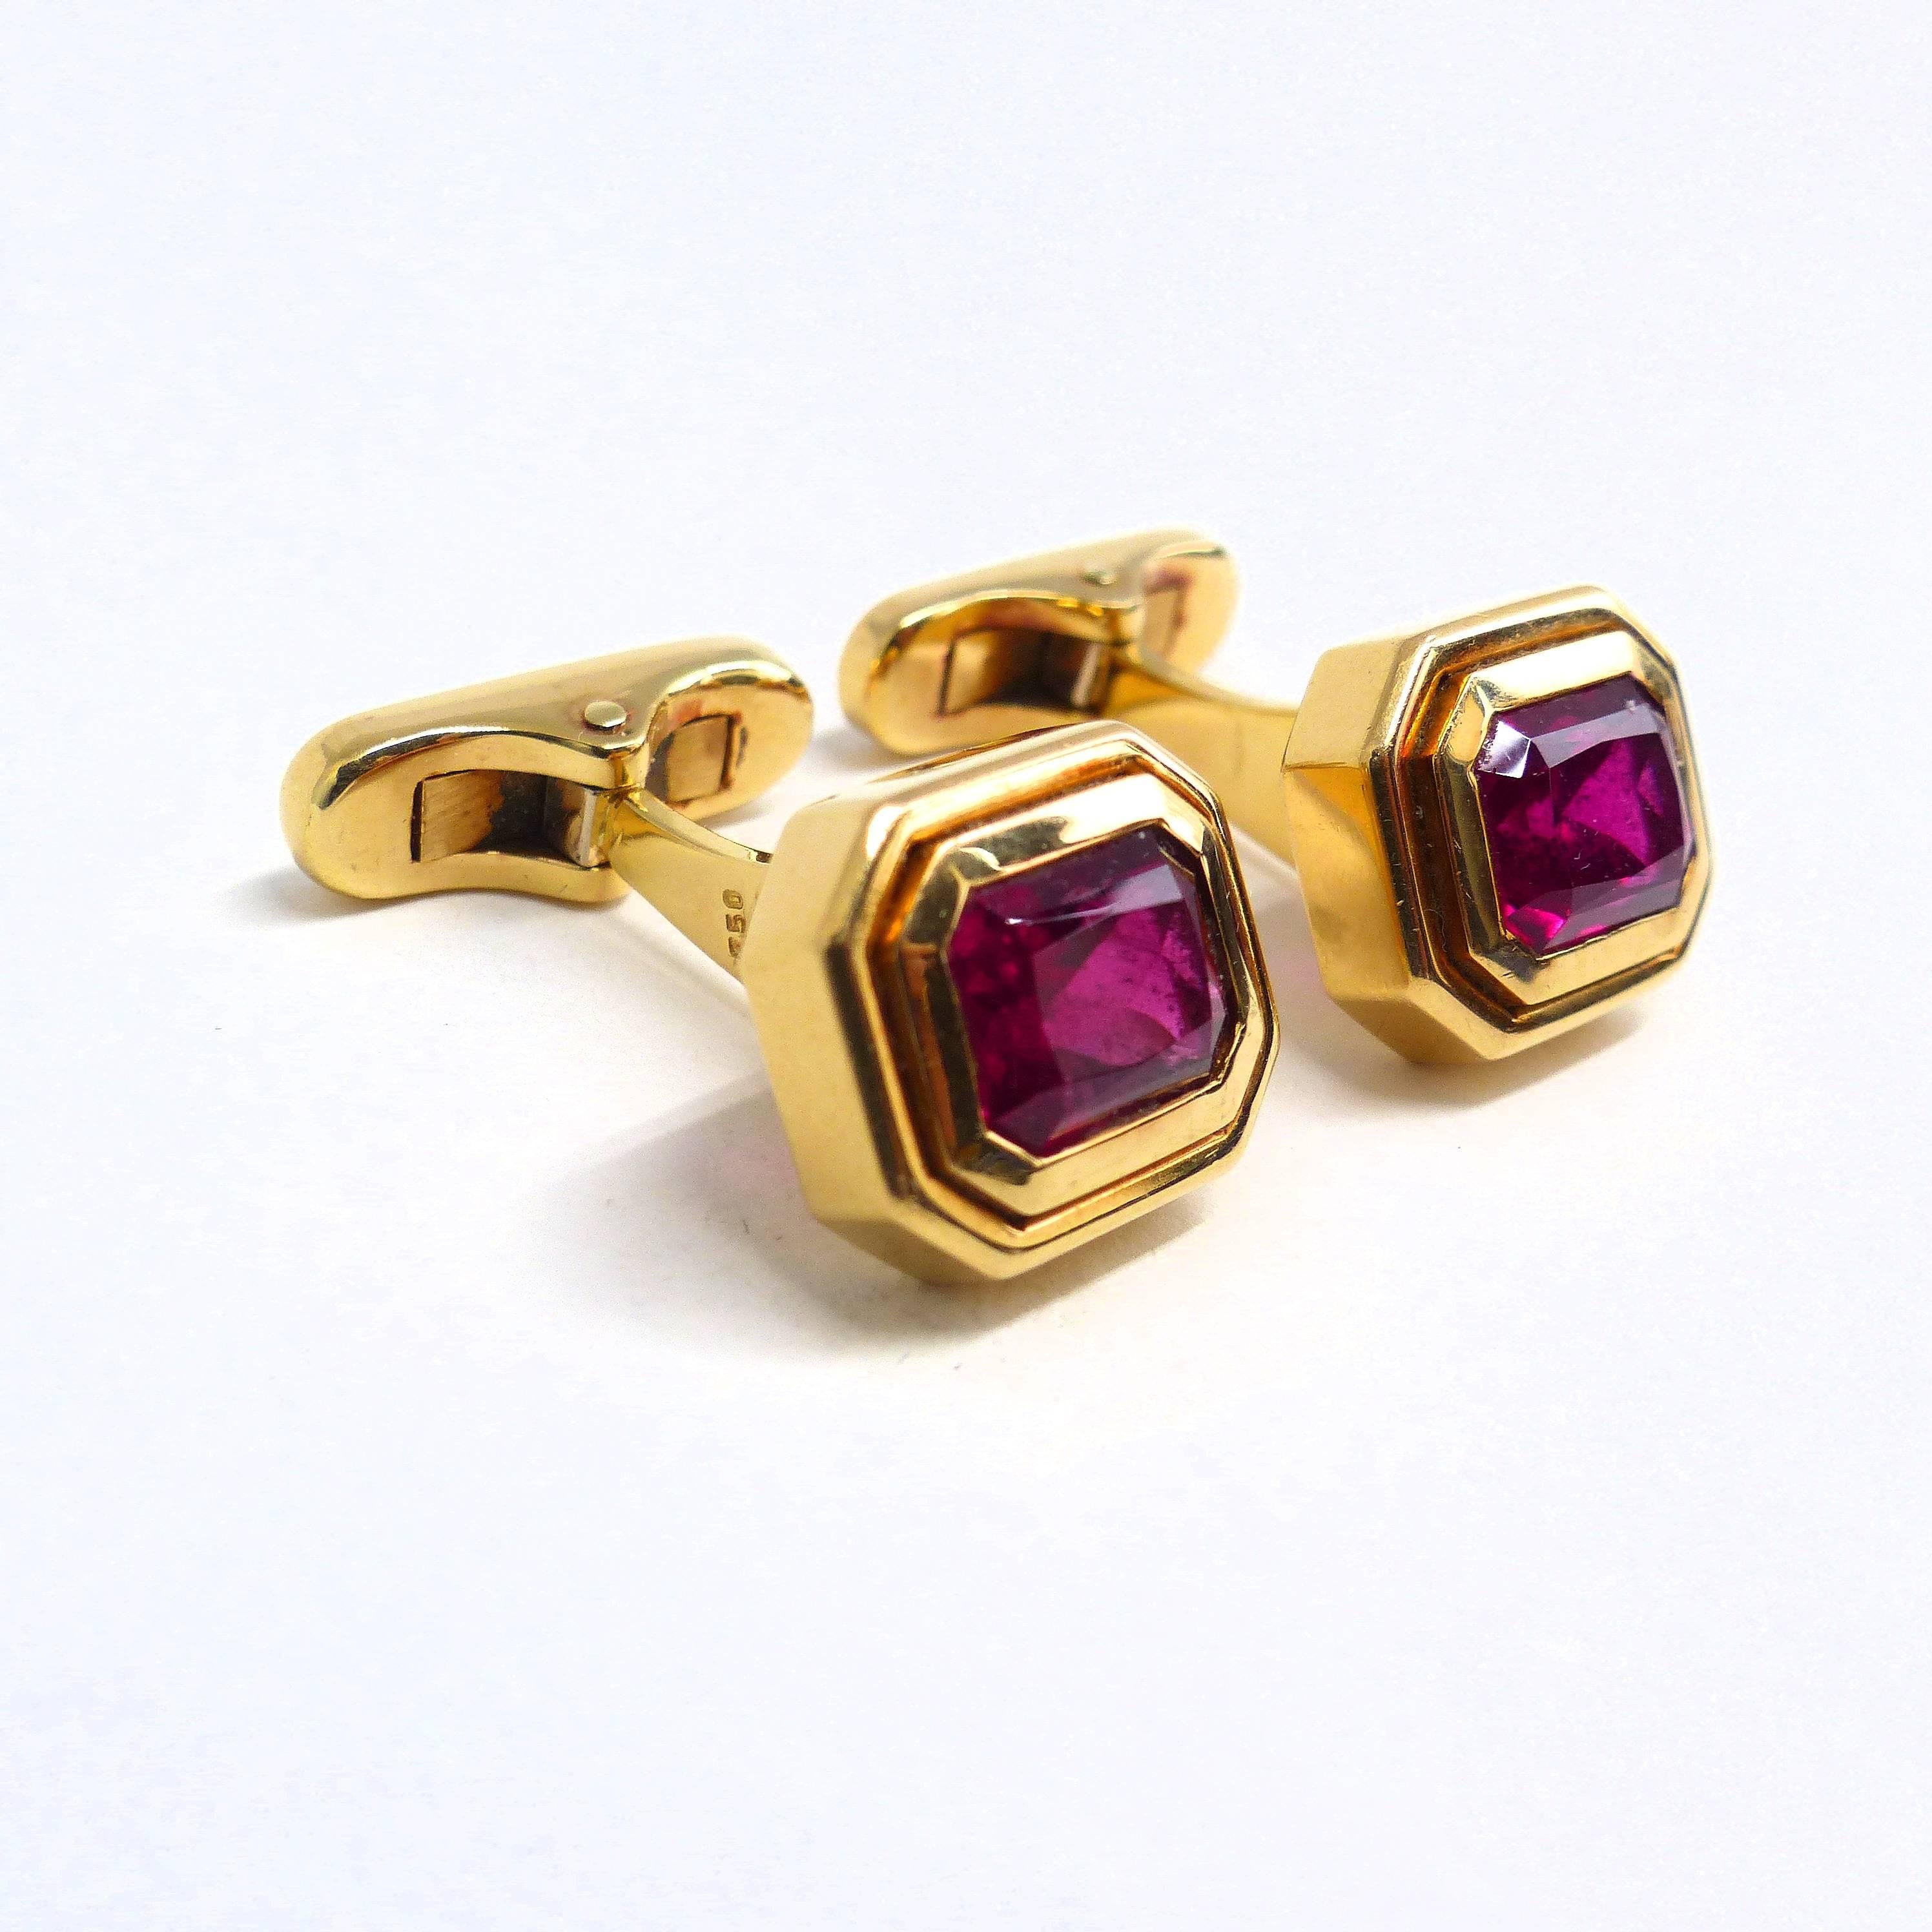 Thomas Leyser is renowned for his contemporary jewellery designs utilizing fine gemstones. 

These 18k rose gold (23.70g) cufflinks are set with 2 top quality facetted Rubelites in Emerald shape, 9x7mm, 4.84cts..

